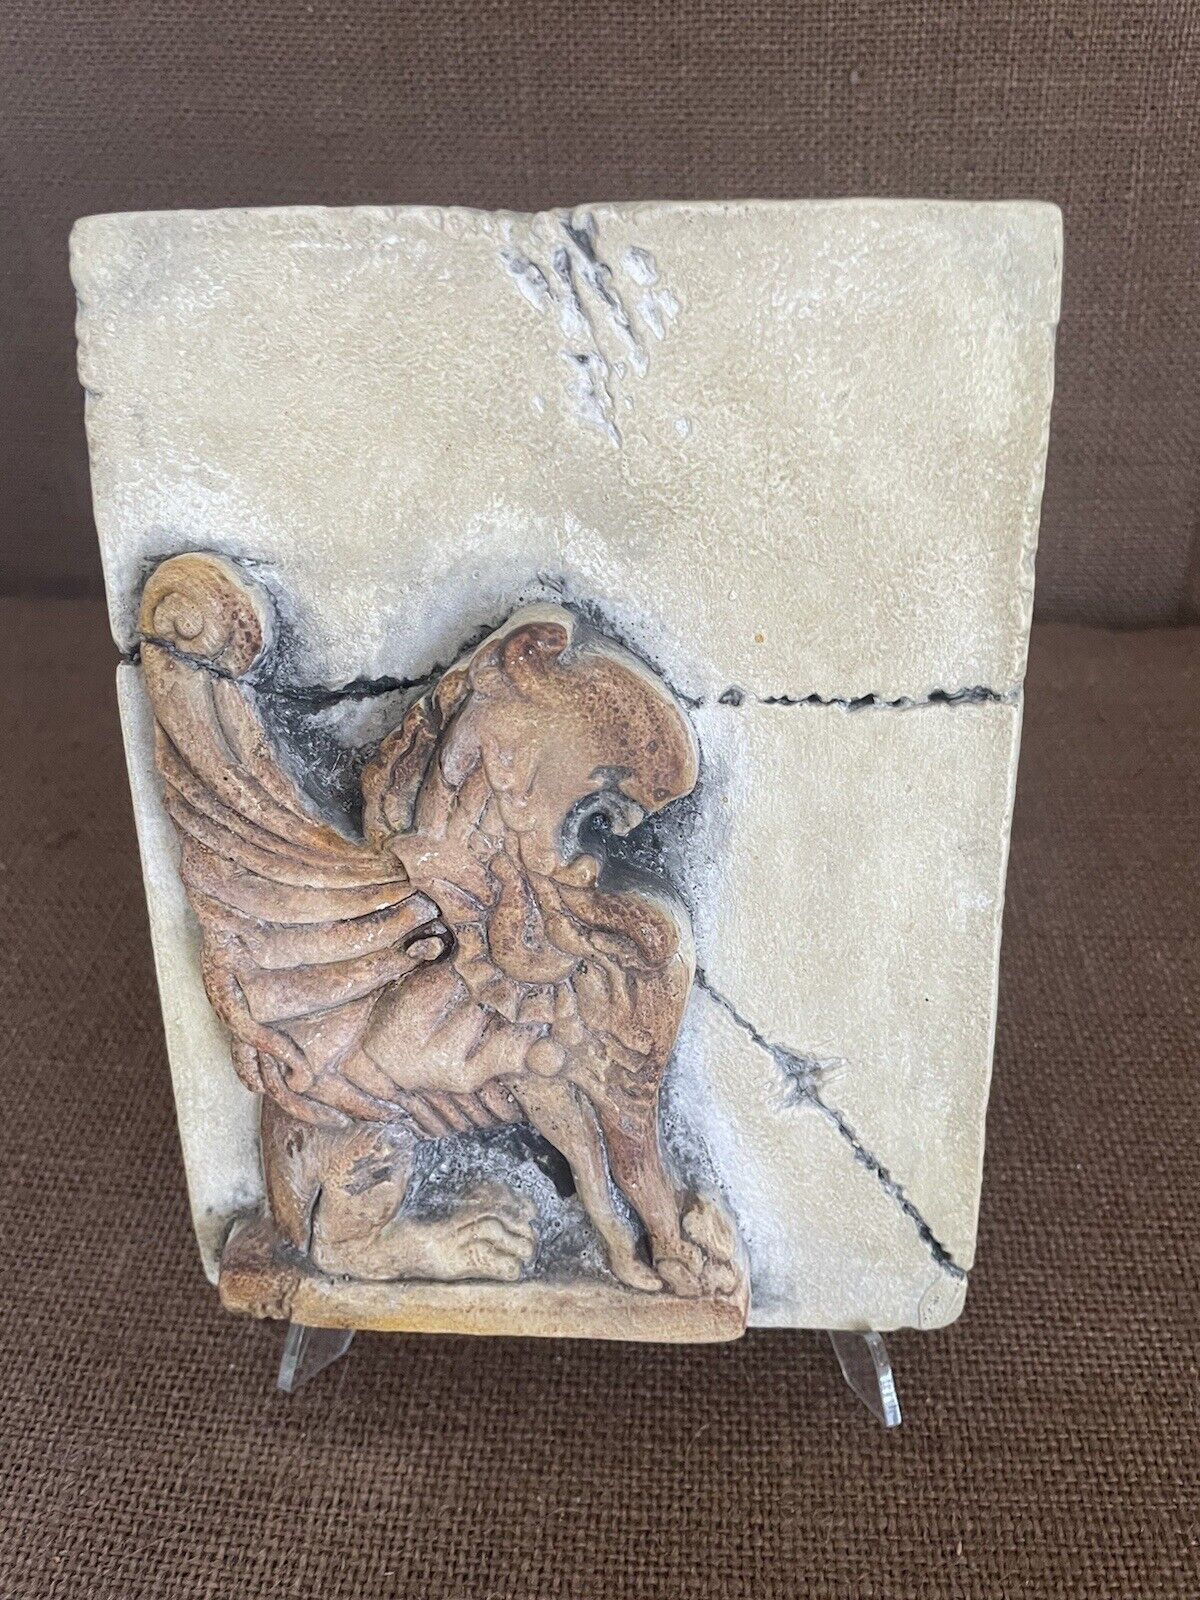 “SID DICKENS STYLE” MEMORY BLOCK TILE GRIFFIN CERAMIC POMPPEII SERIES 6 8 1.5 D